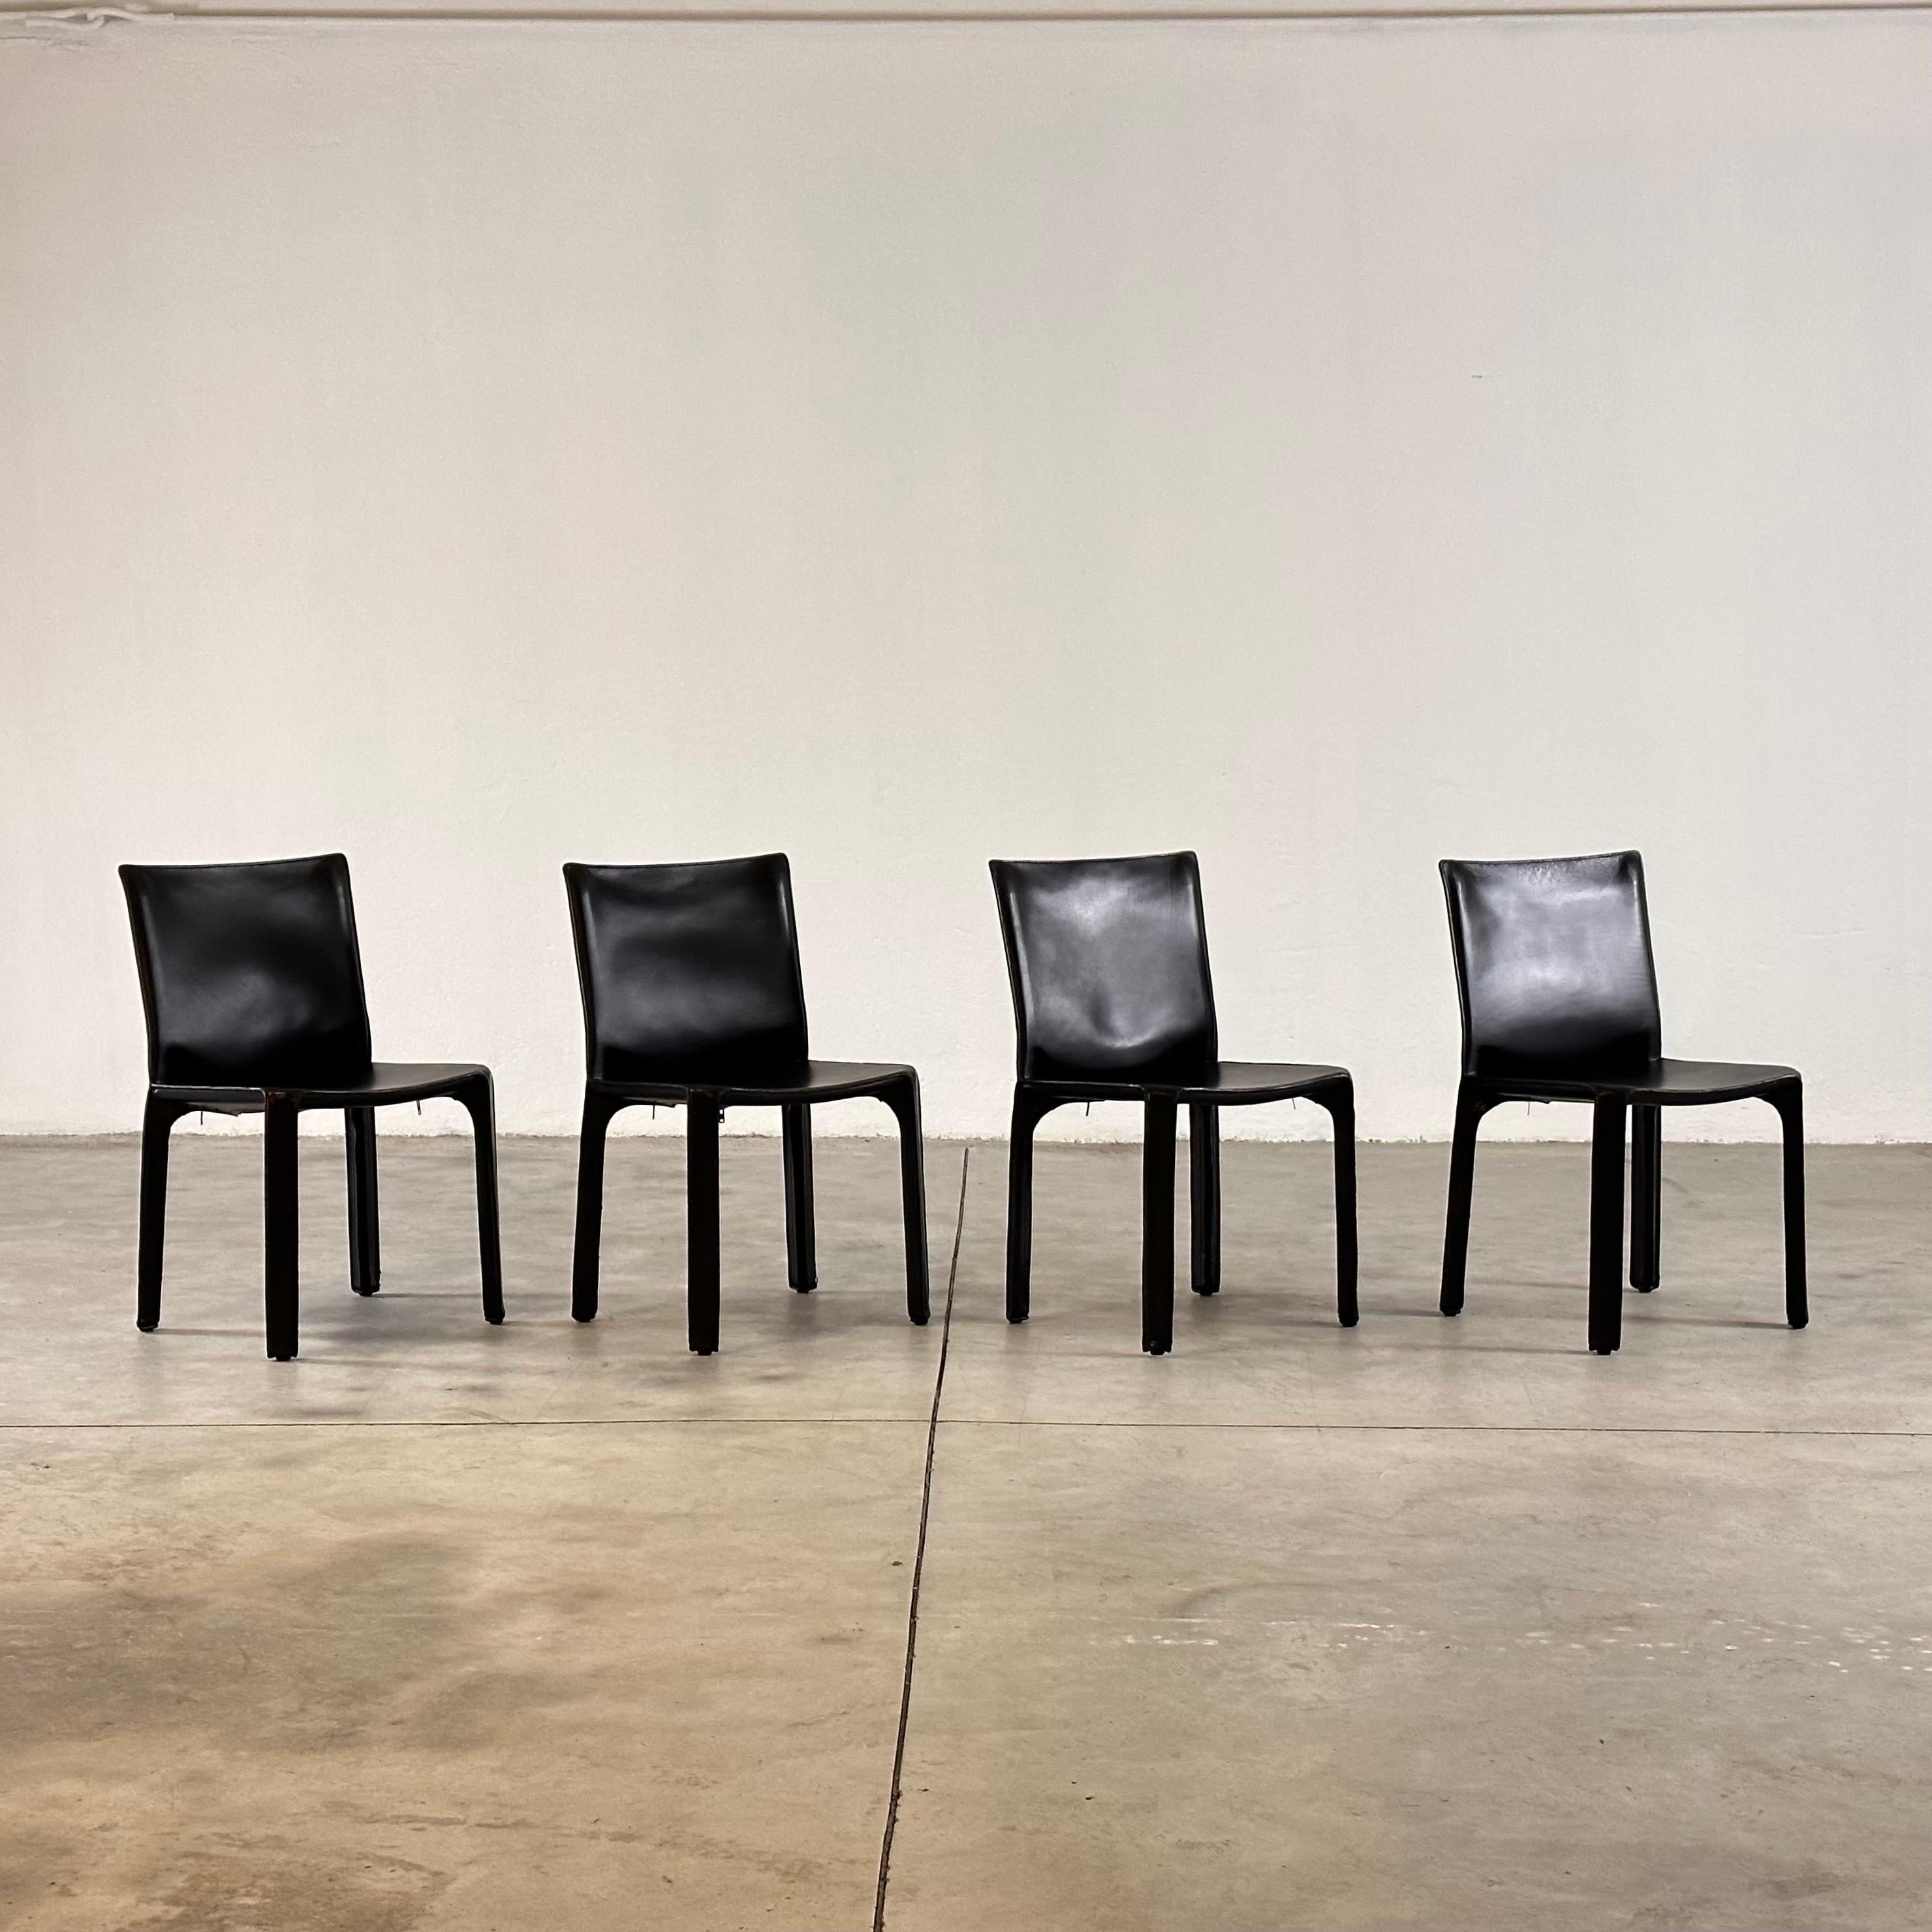 A set of four Italian design icons in black saddle leather.

When first produced in 1977, the CAB was the first chair to feature a free-standing leather structure, inspired by how human skin fits over our skeleton. The leather upholstery is